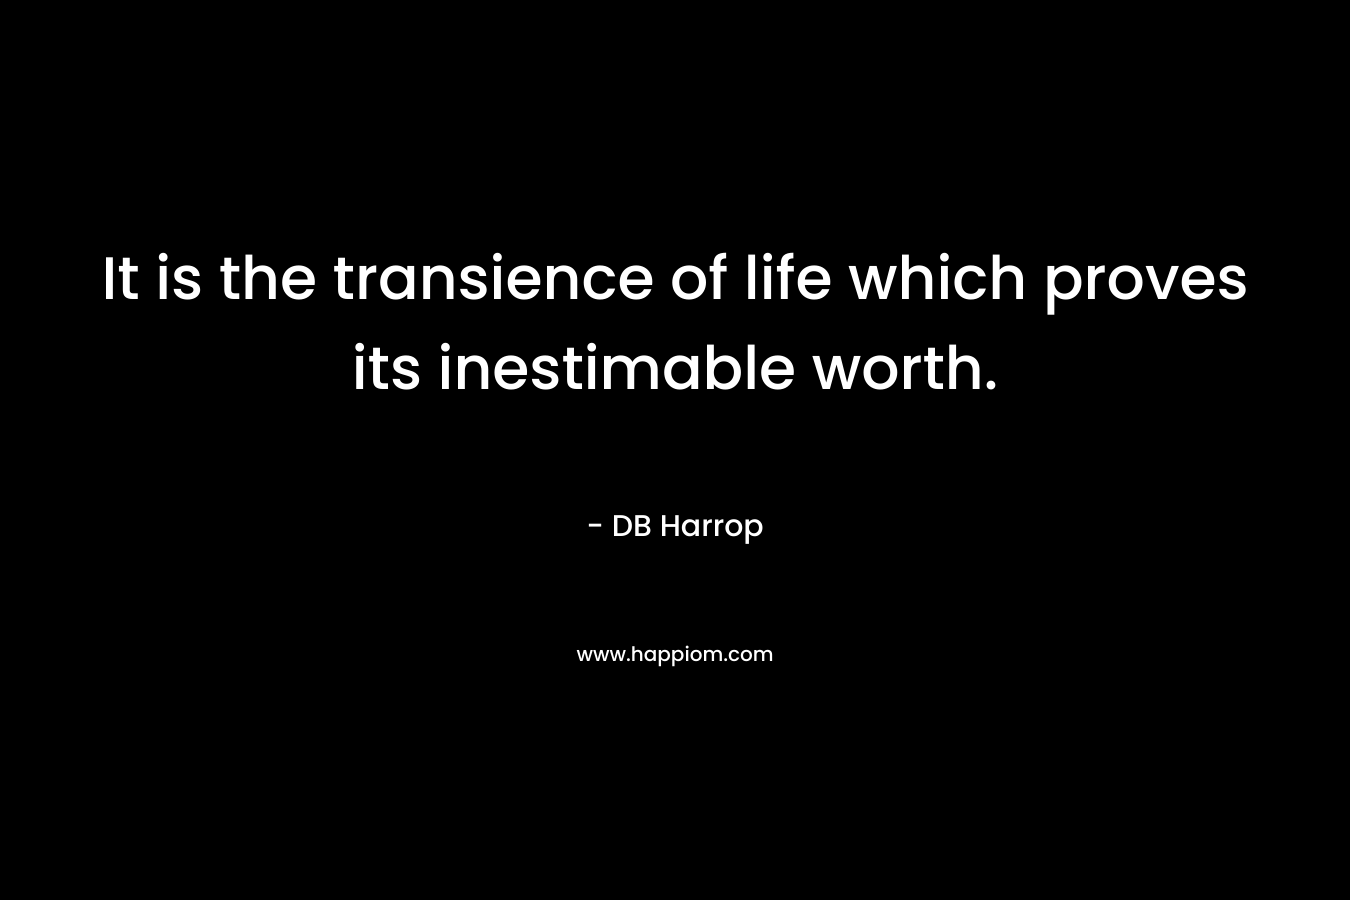 It is the transience of life which proves its inestimable worth.